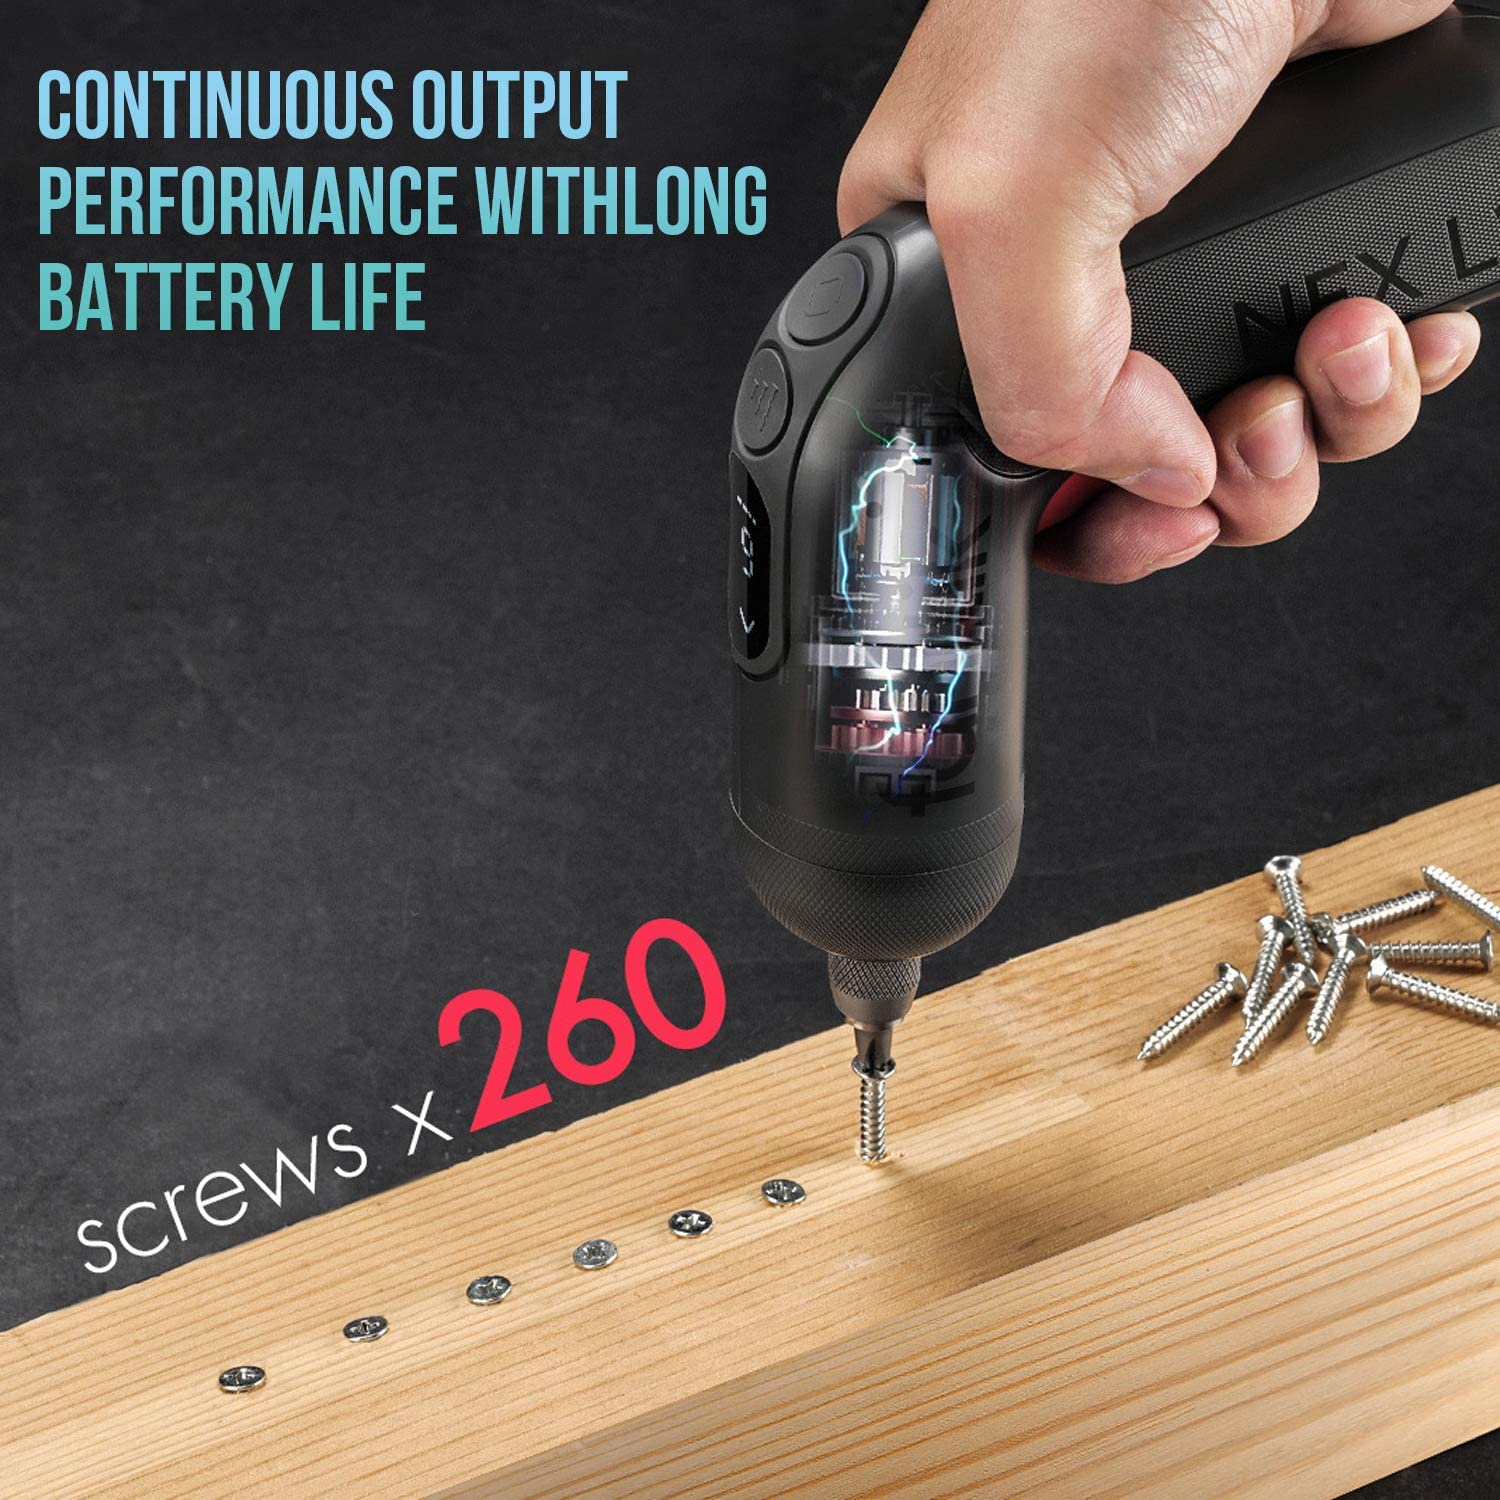 Powered by a 2000 mAh Samsung rechargeable Li-ion battery, this power screwdriver can work 262 screws on one charge.